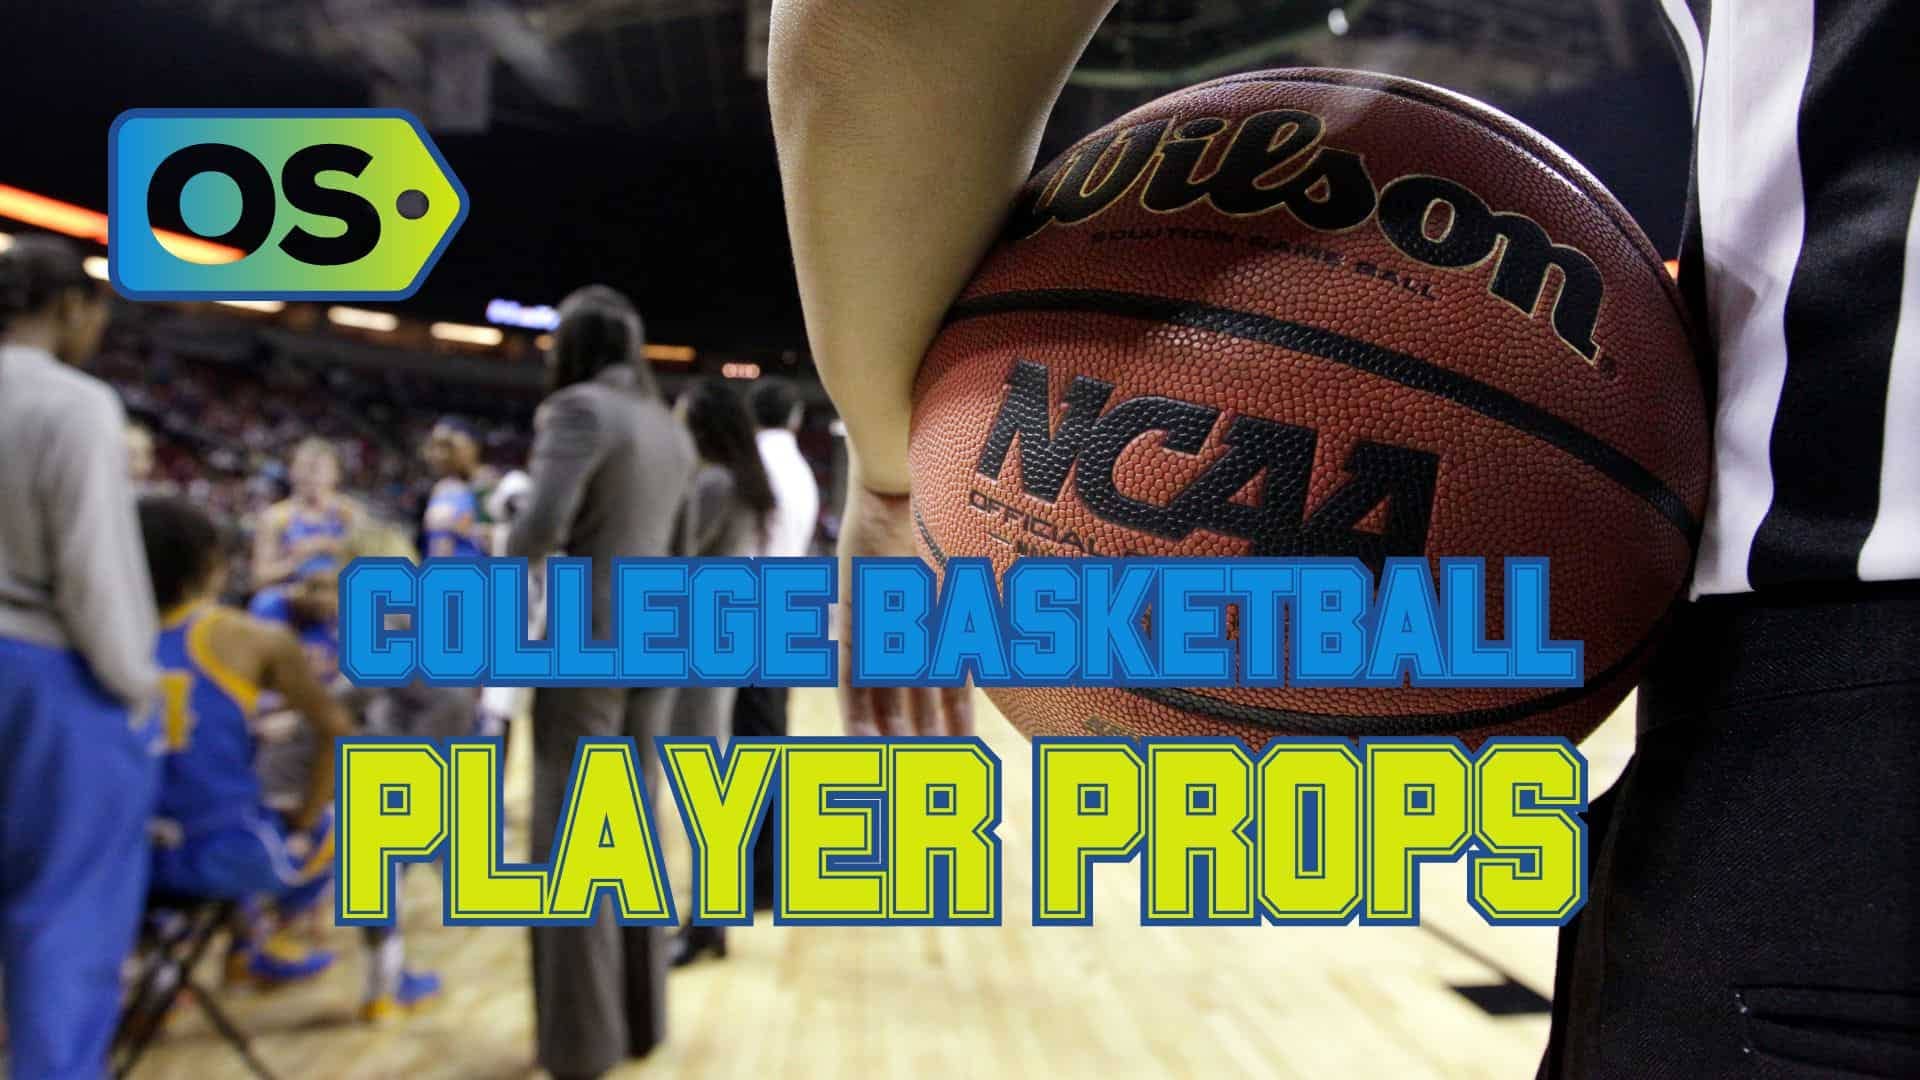 Photo: college basketball player props